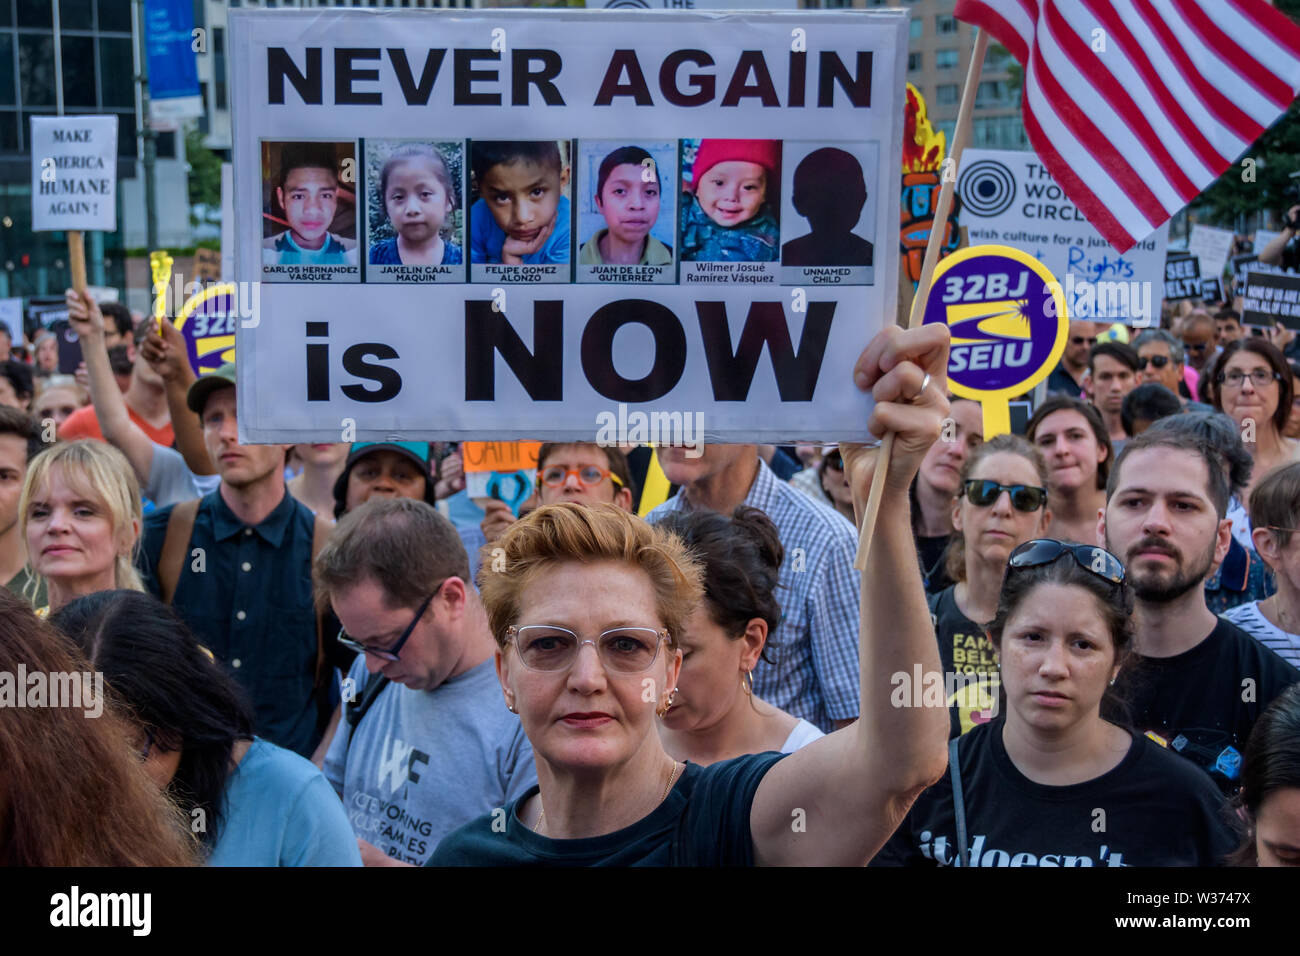 New York, USA. 12th July, 2019. Thousands of advocates, activists and community members flooded the streets at Foley Square, across from the Immigration and Customs Enforcement (ICE) New York Field Office on July 12, 2019 to join New Sanctuary Coalition and The New York Immigration Coalition at the Lights for Liberty vigil, deemed one of the largest solidarity actions in history with over 750 vigils across 5 continents. A light was lit for all those held in U.S. detention camps and to bring light to the darkness of the Trump administration's horrific policies. Credit: PACIFIC PRESS/Alamy Live  Stock Photo